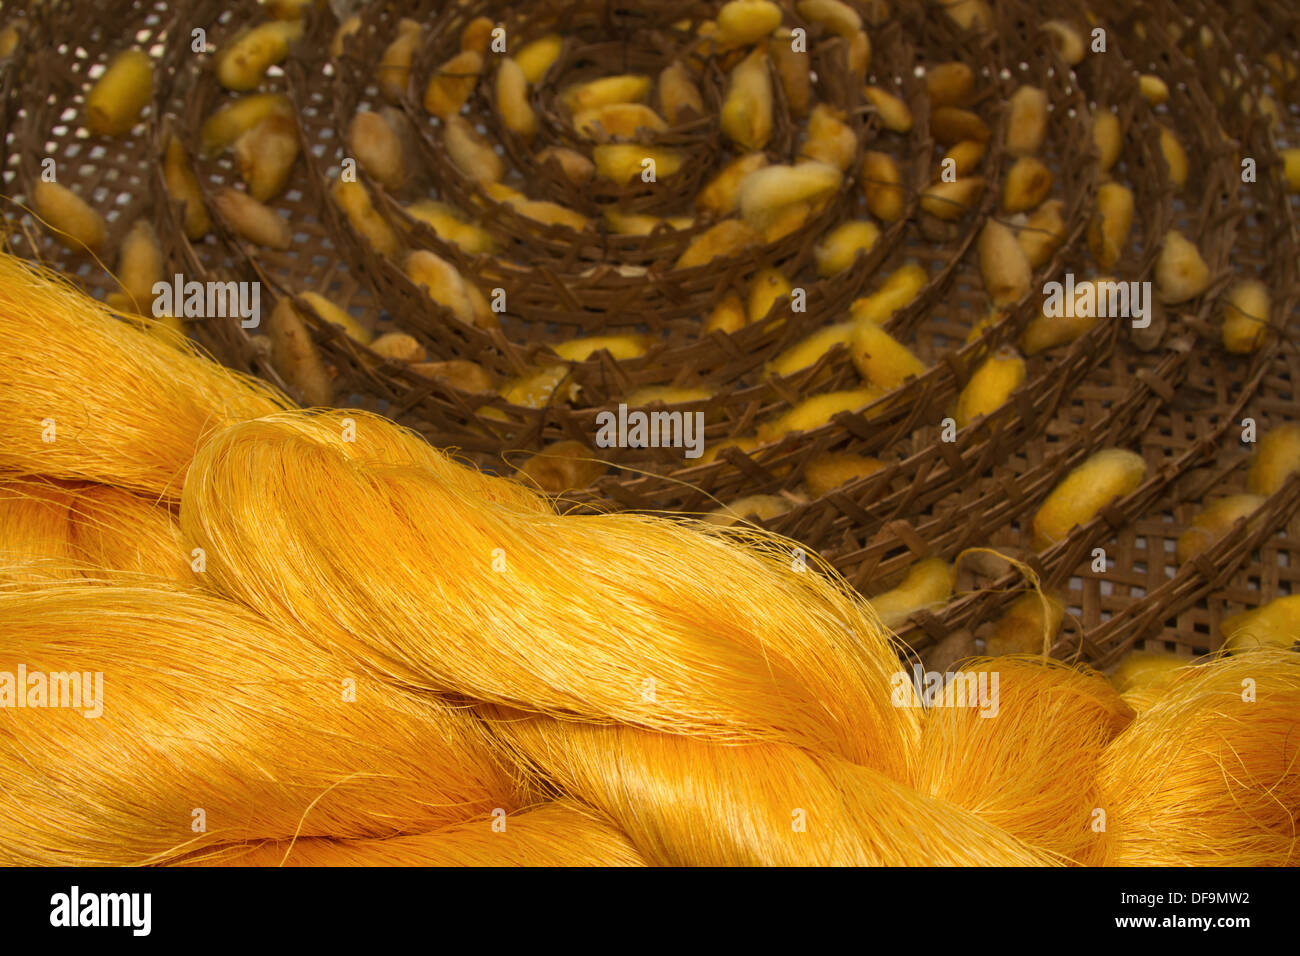 Silk cocoons and raw silk threads Stock Photo